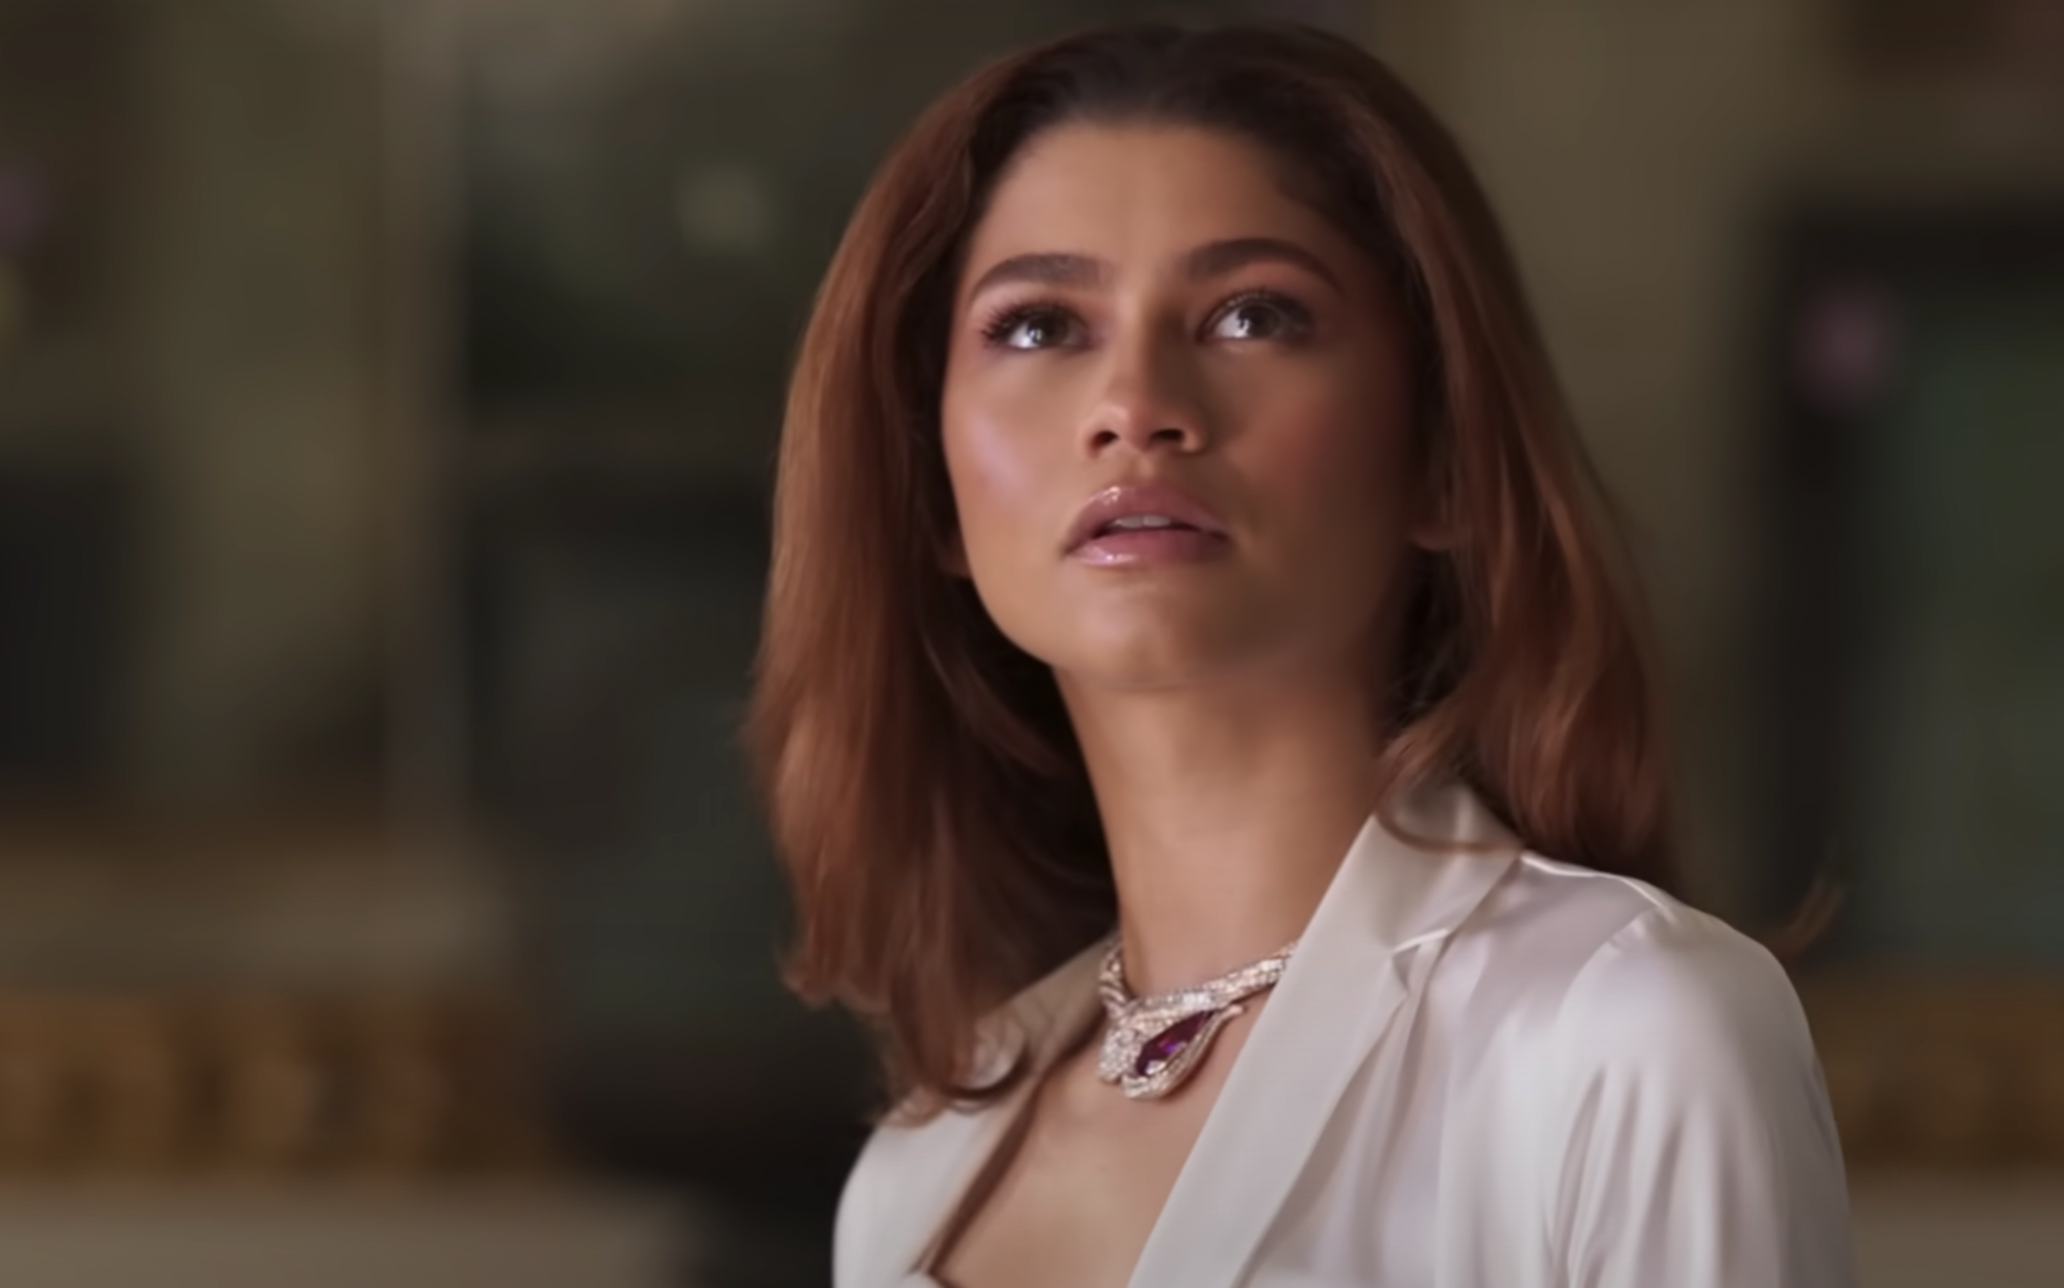 How Tall Is Zendaya And What Is Her Ethnicity? - TrendRadars